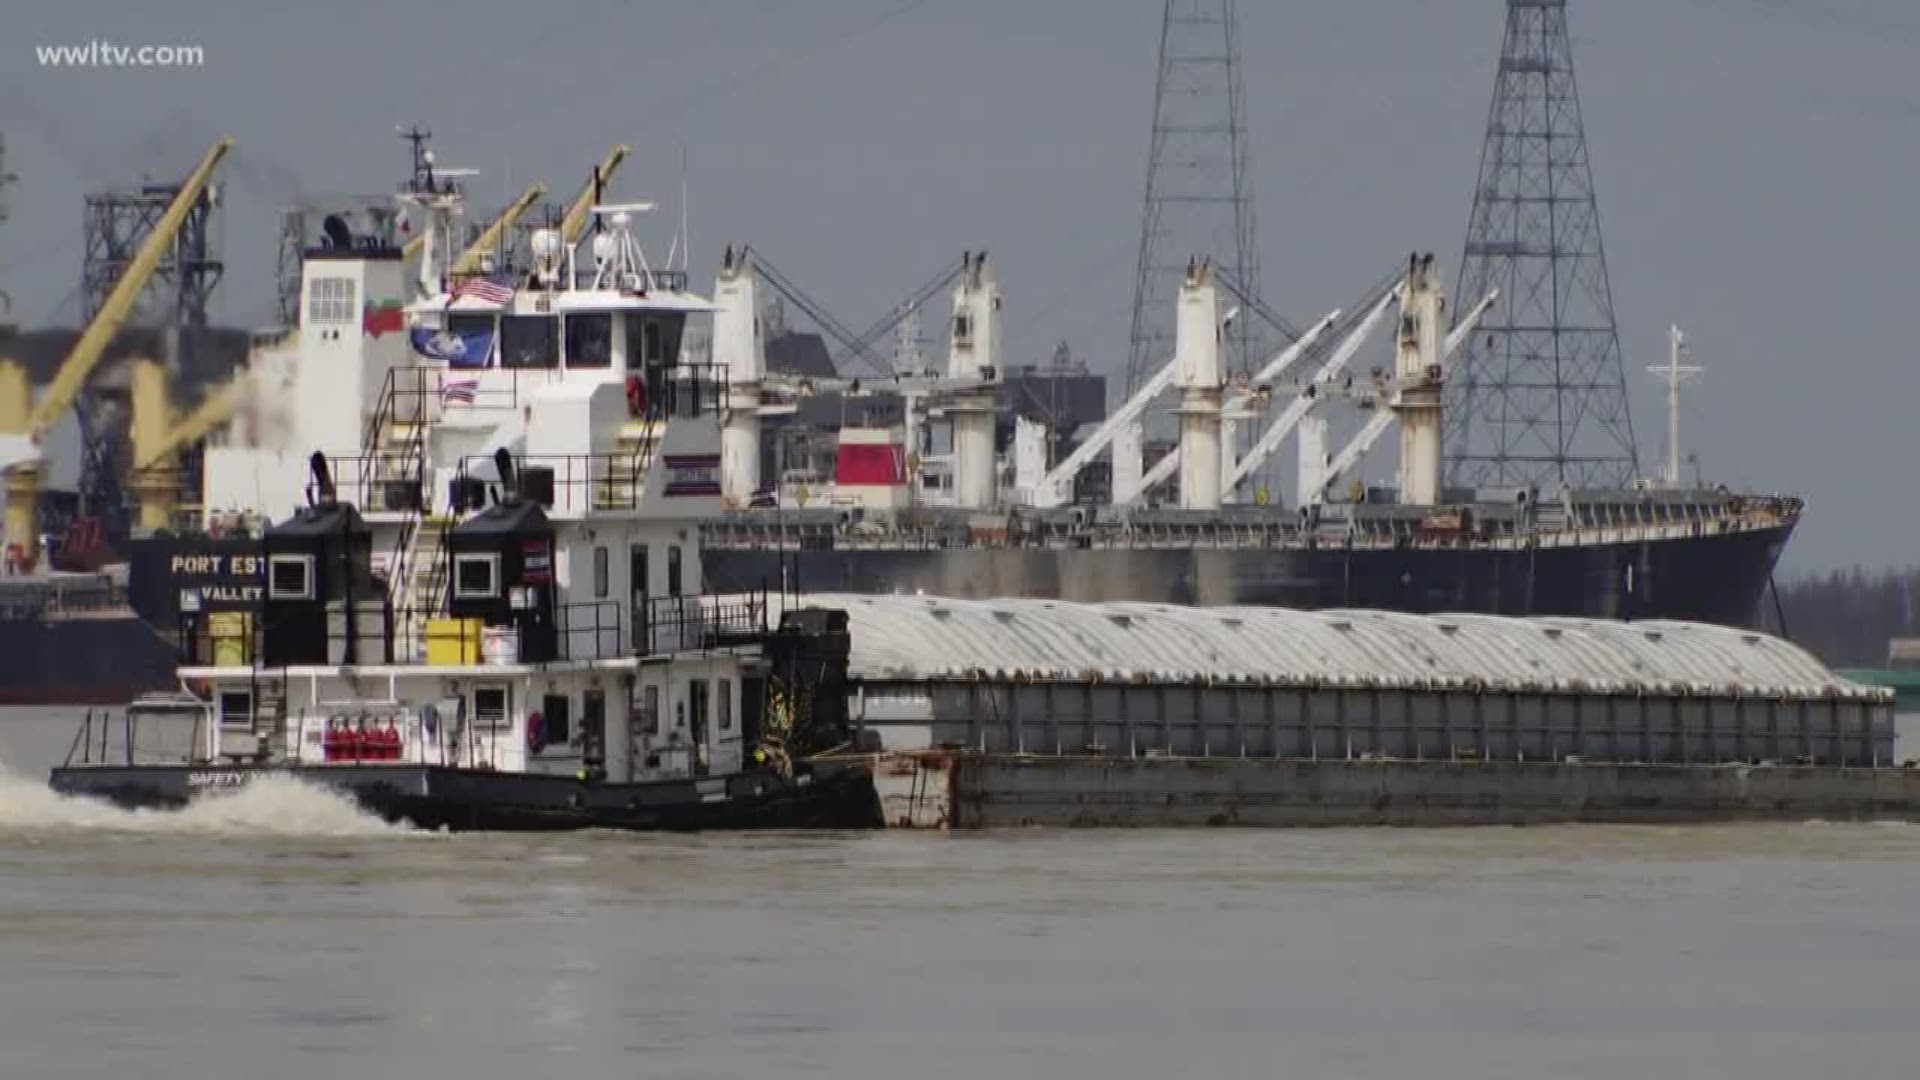 The video shows a large cargo ship get caught in the strong current.